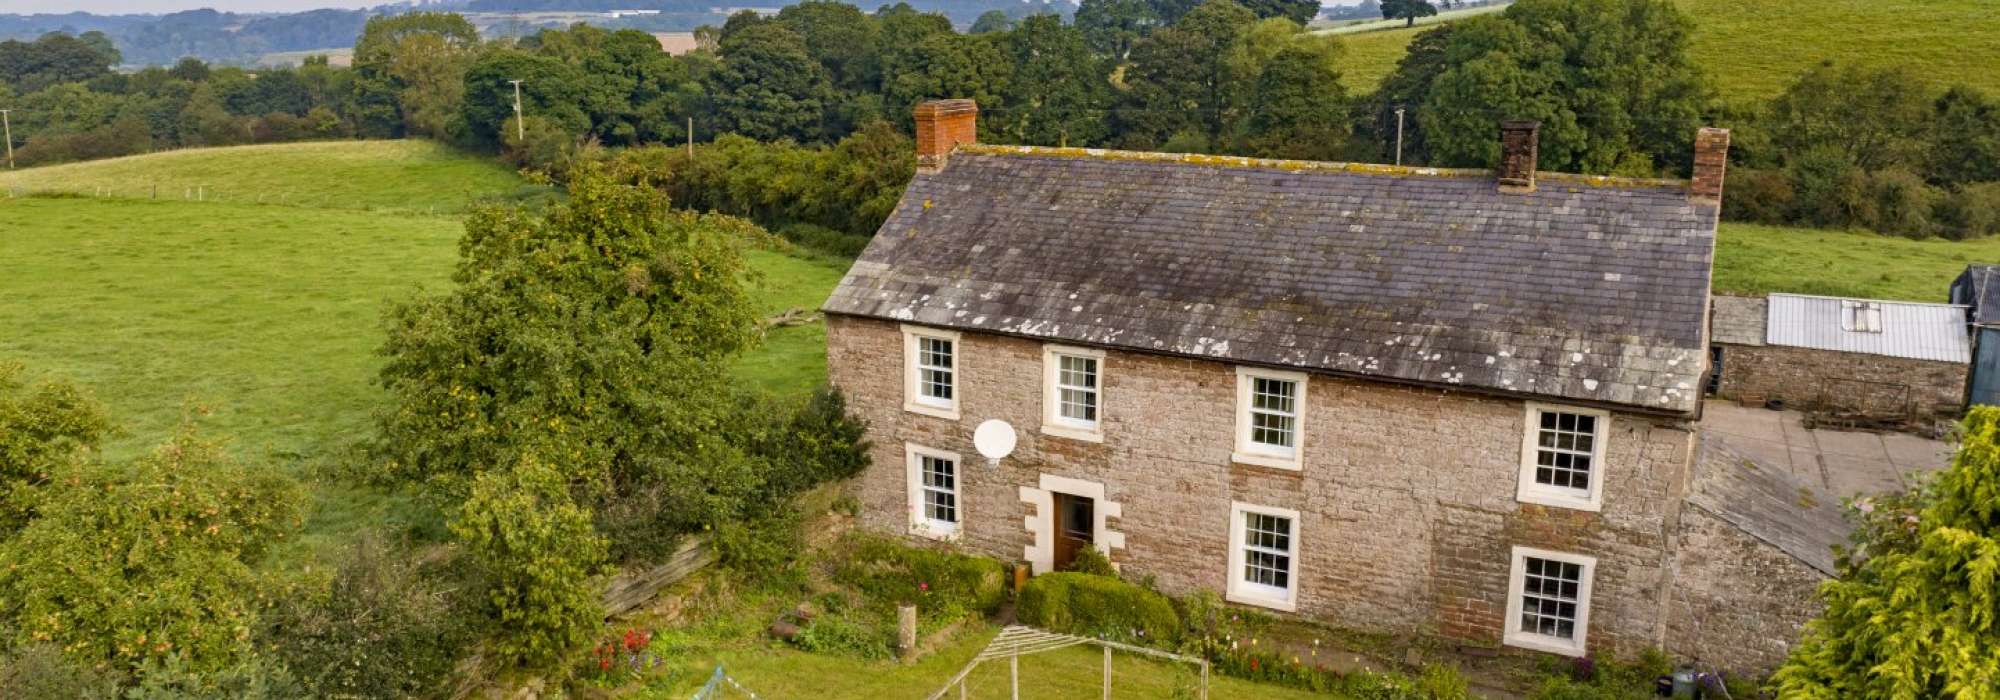 Eden Banks Farm traditional stone farmhouse sat surrounded by fields and woodland 